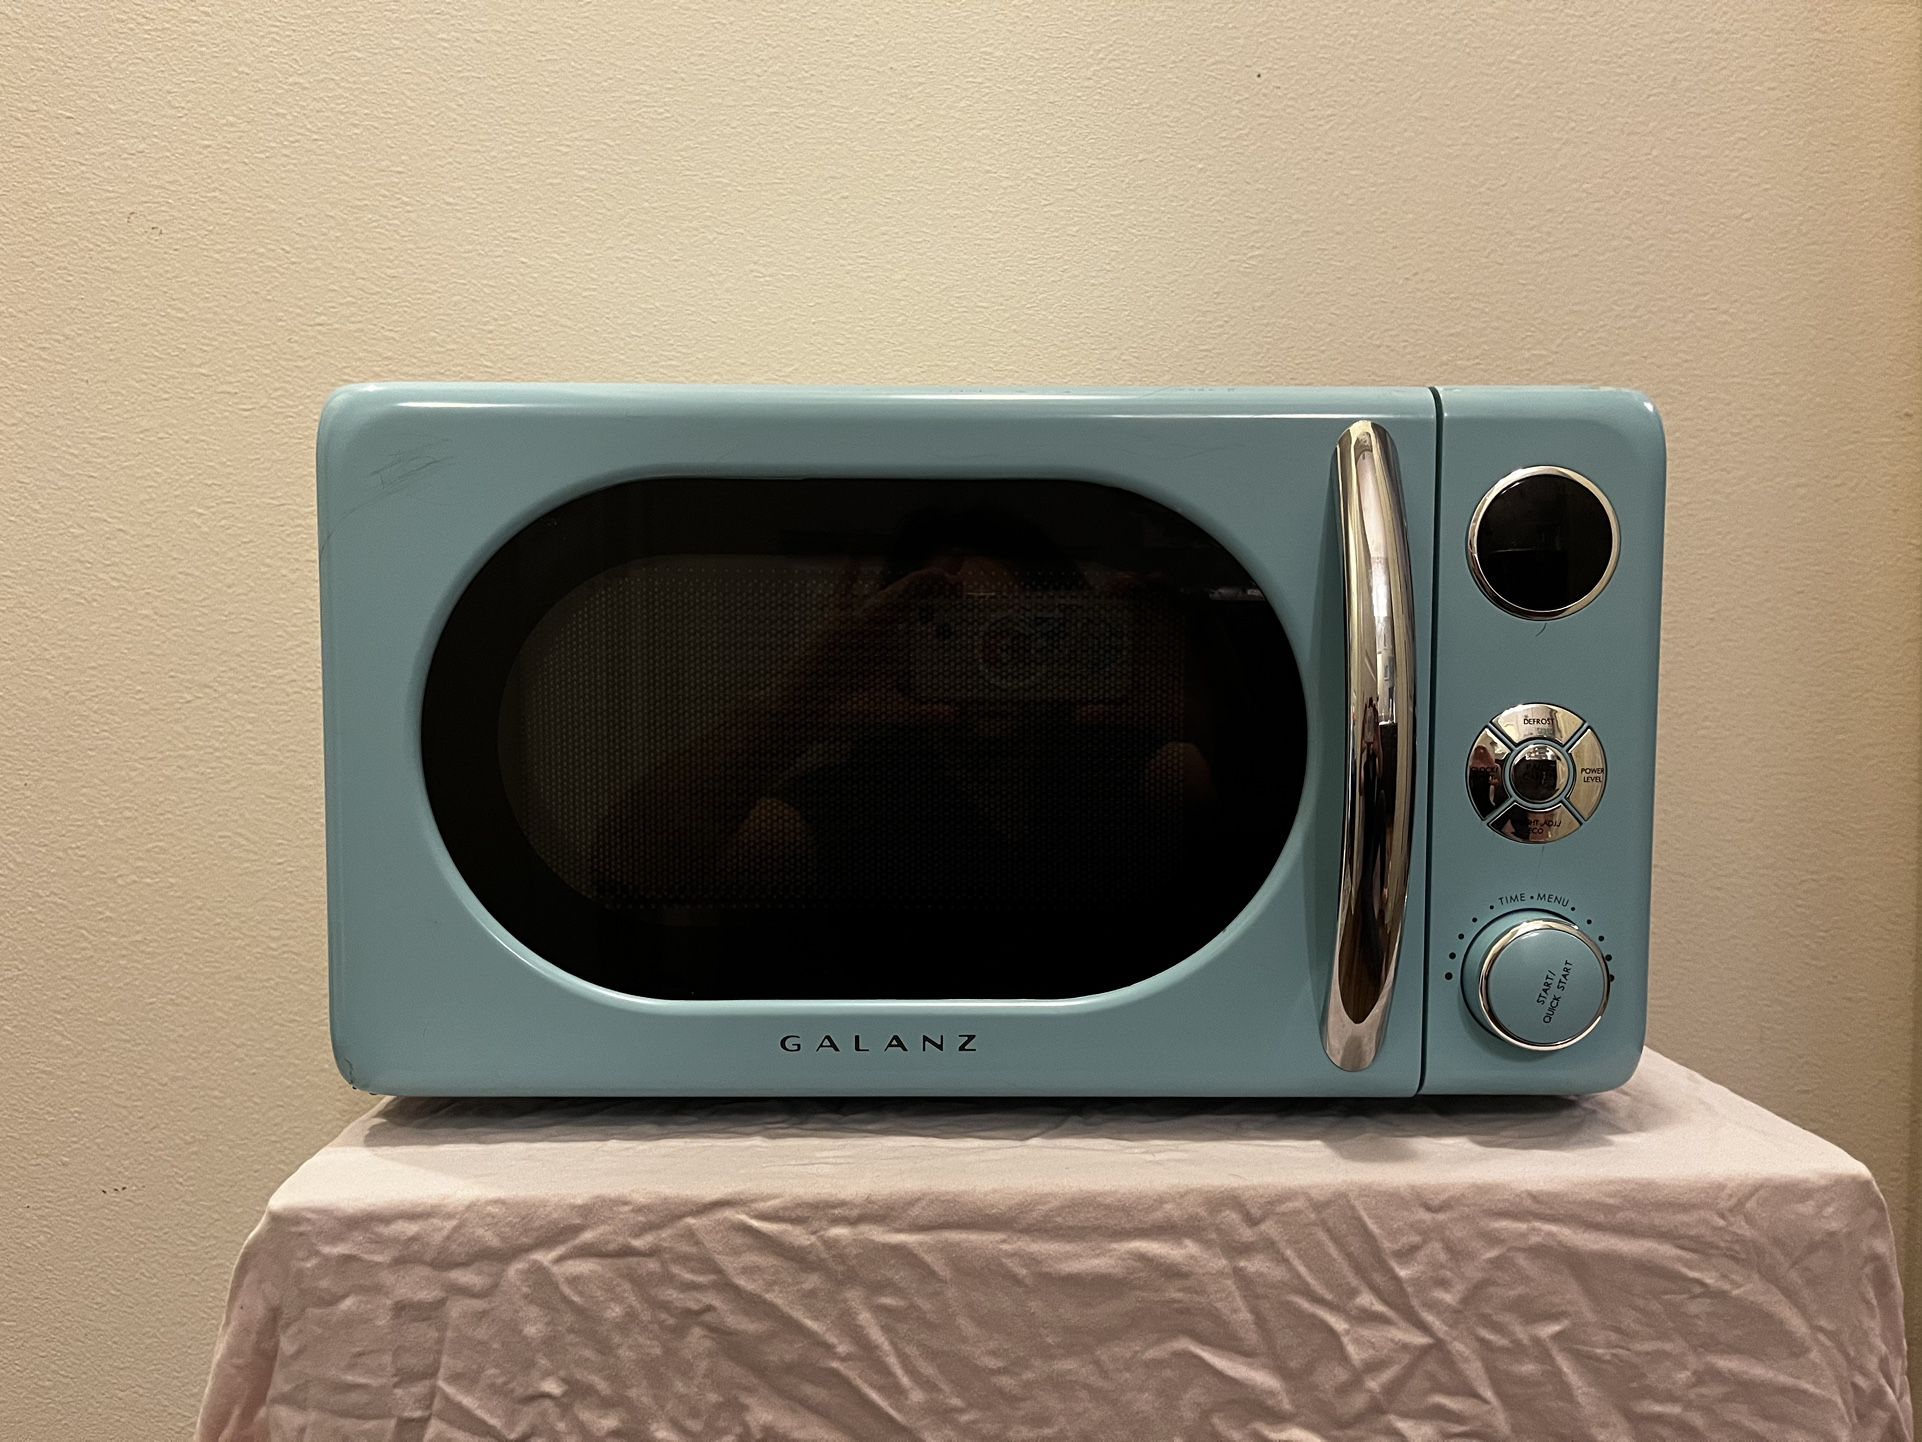 Vintage Style Galanz Microwave - Baby blue